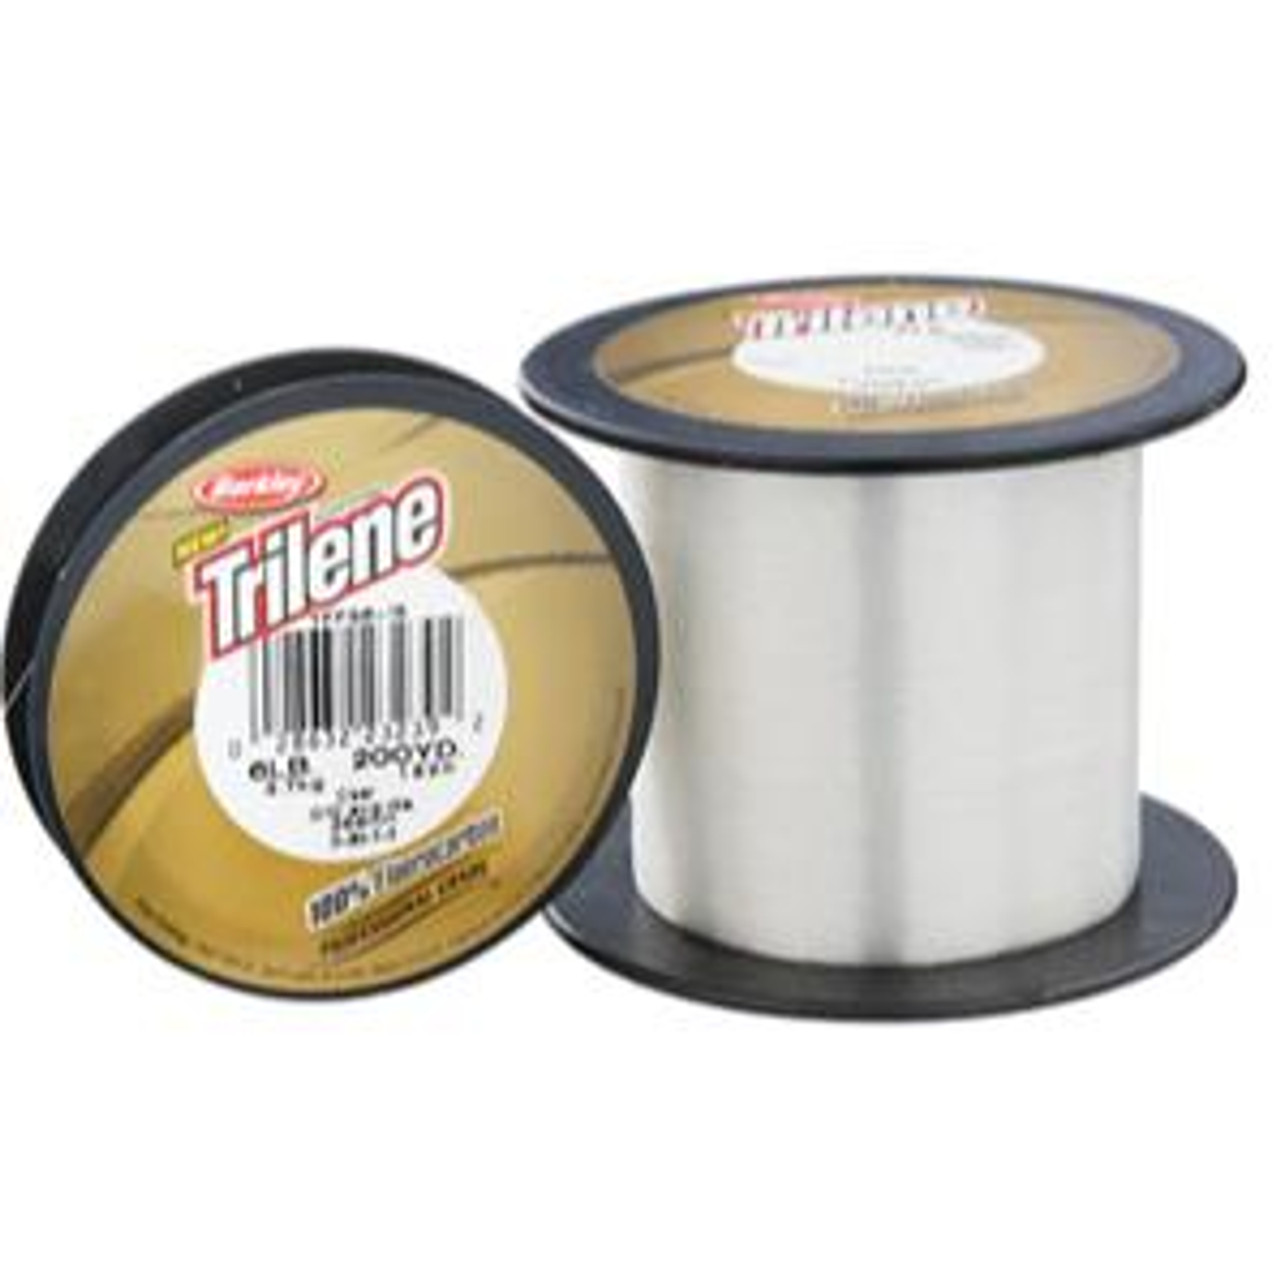 https://cdn11.bigcommerce.com/s-70mih4s/images/stencil/1280x1280/products/3510/12444/Berkley-Trilene-100-Fluorocarbon-Clear-20lb-2000yd-02863223286_image1__06265.1384879425.jpg?c=2